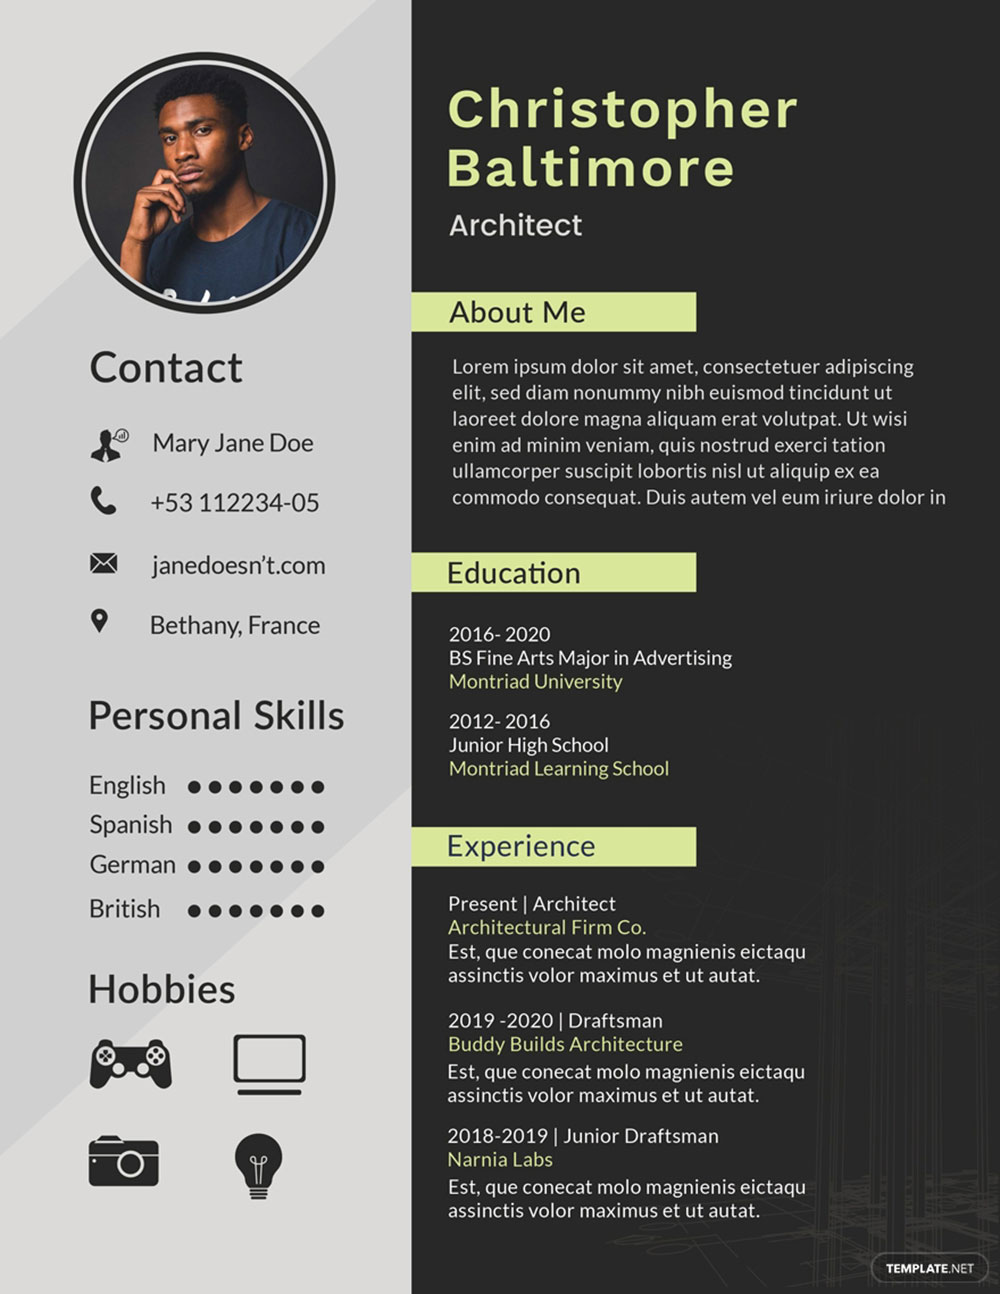 chris The architecture resume that gets you hired (Templates included)